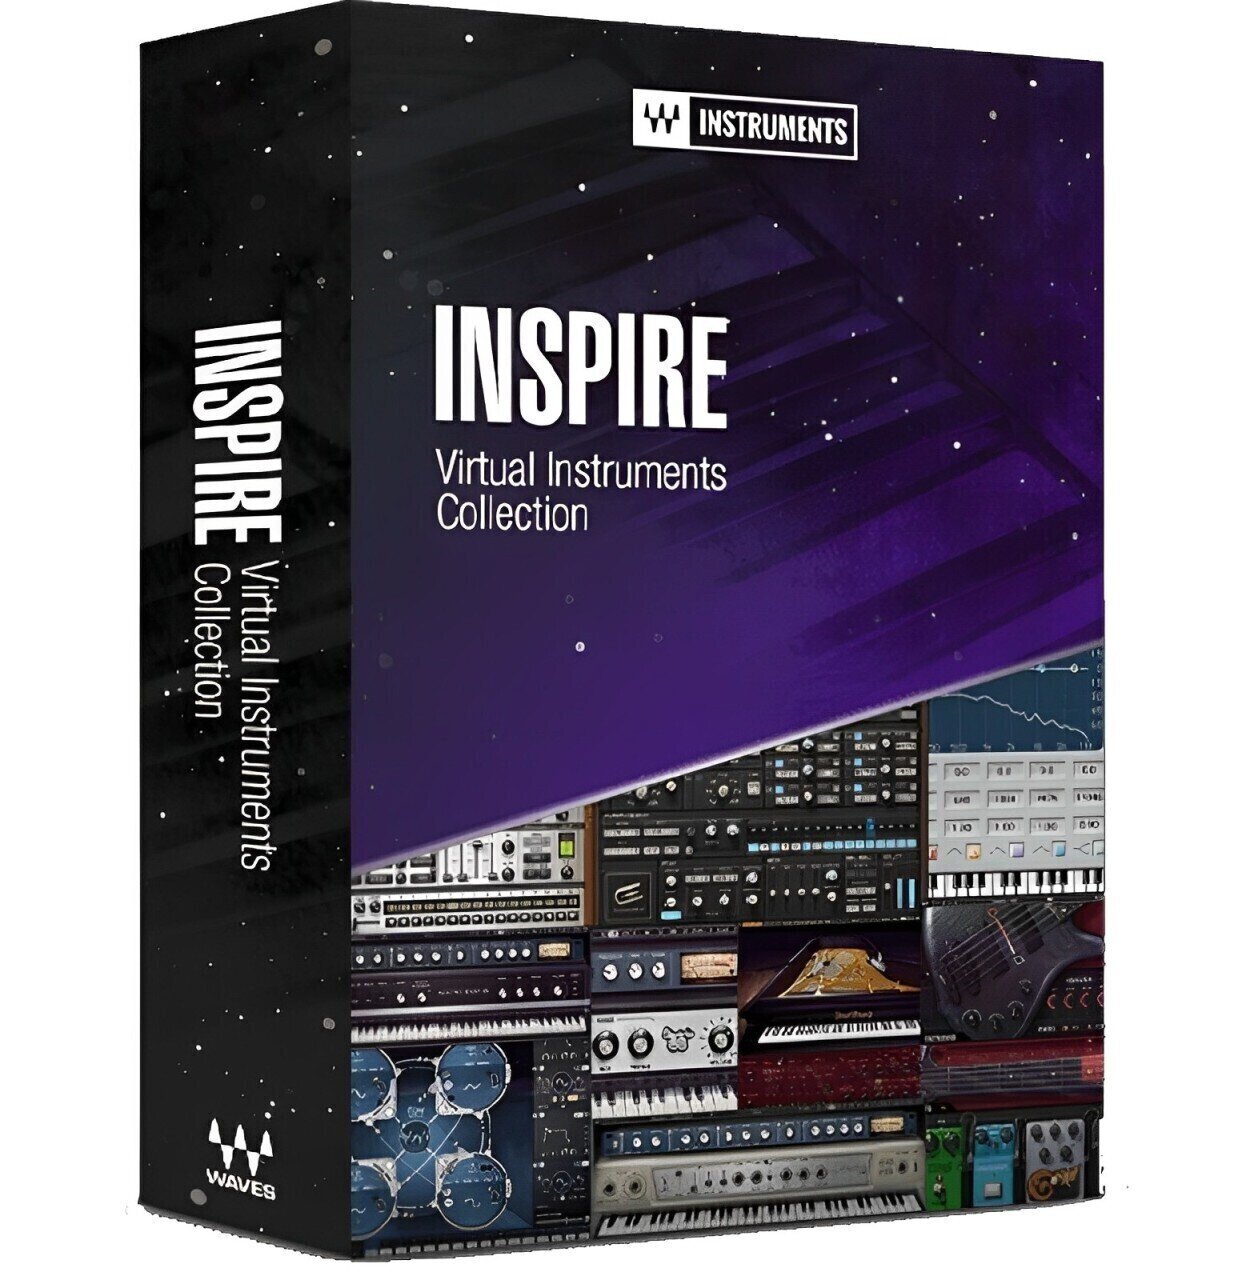 Effect Plug-In Waves Inspire Virtual Instruments Collection (Digital product)